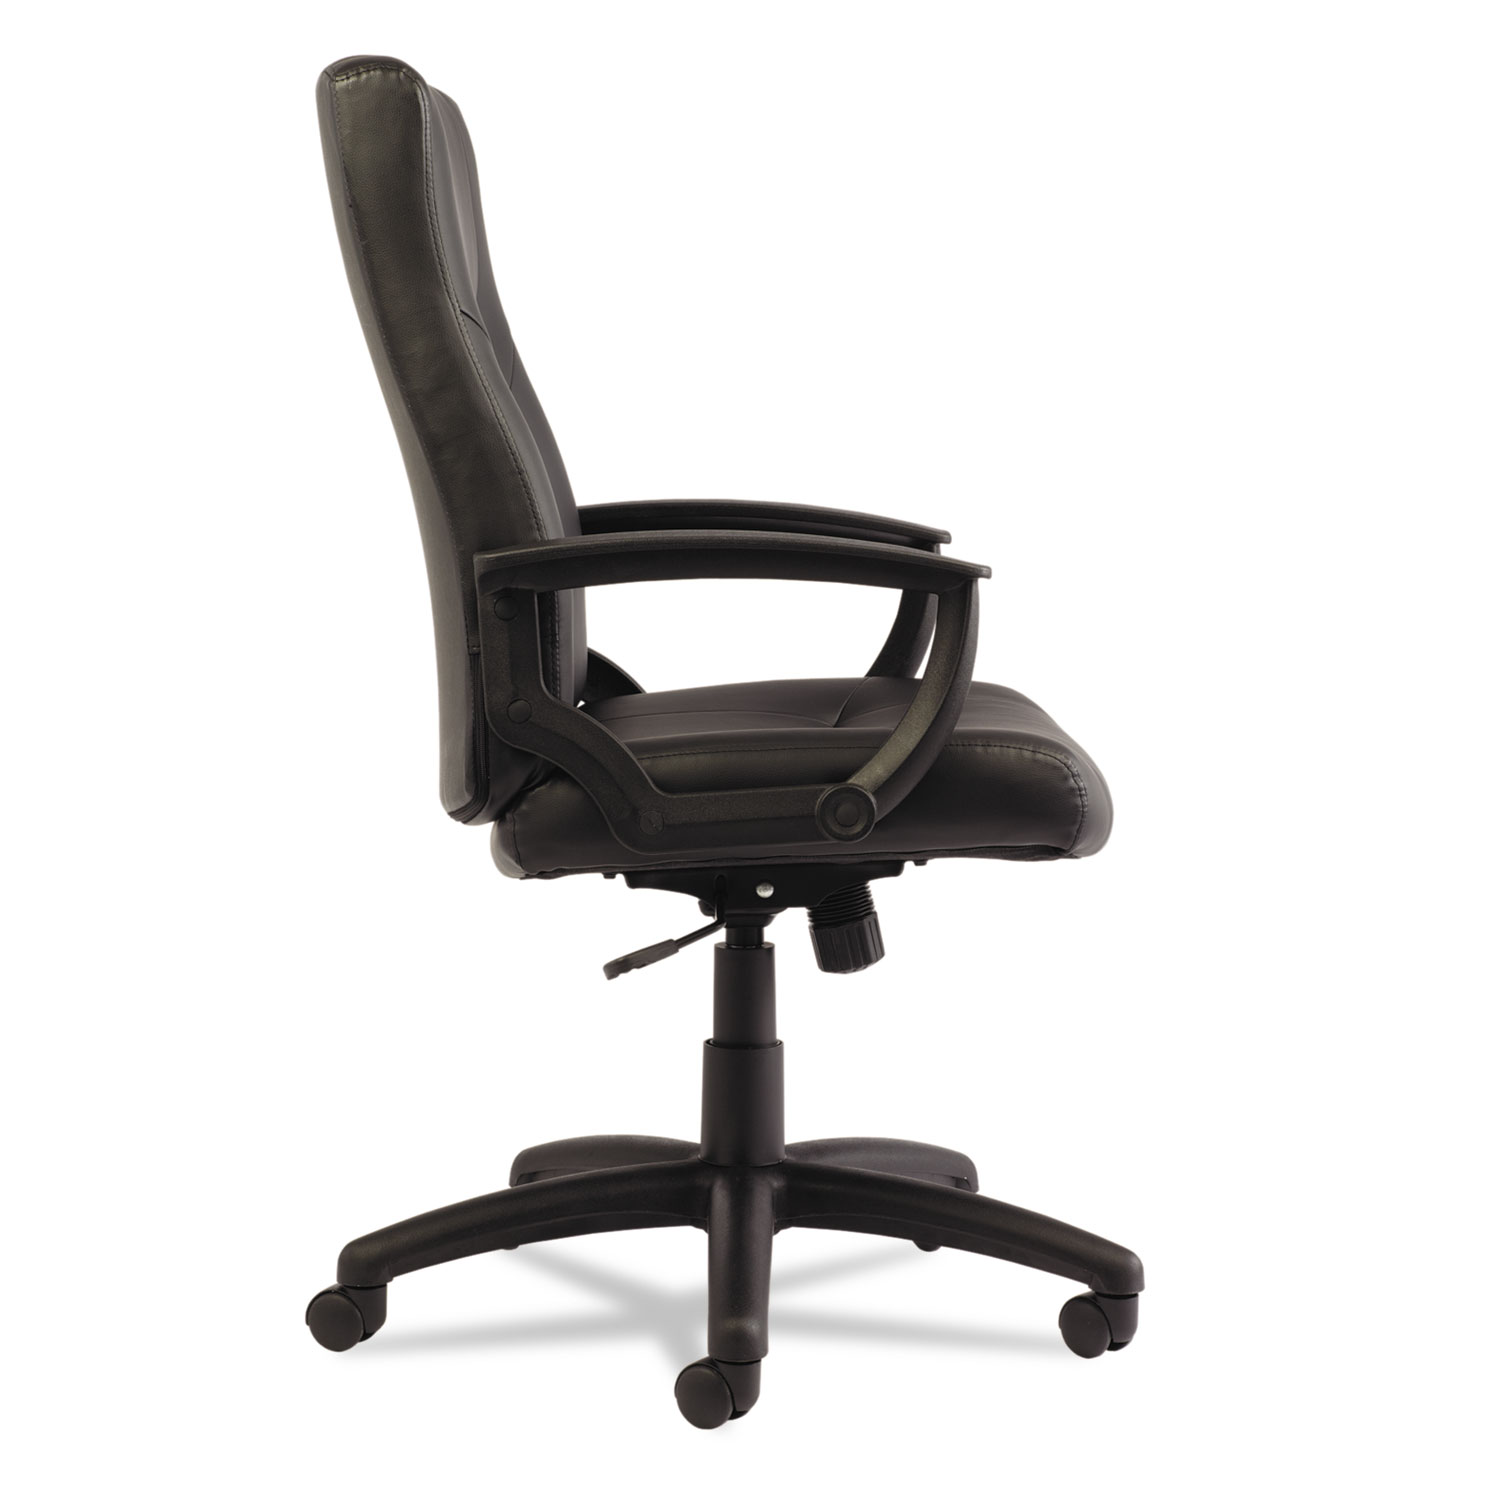 Alera YR Series Executive High-Back Swivel/Tilt Leather Chair, Supports up to 275 lbs., Black Seat/Black Back, Black Base